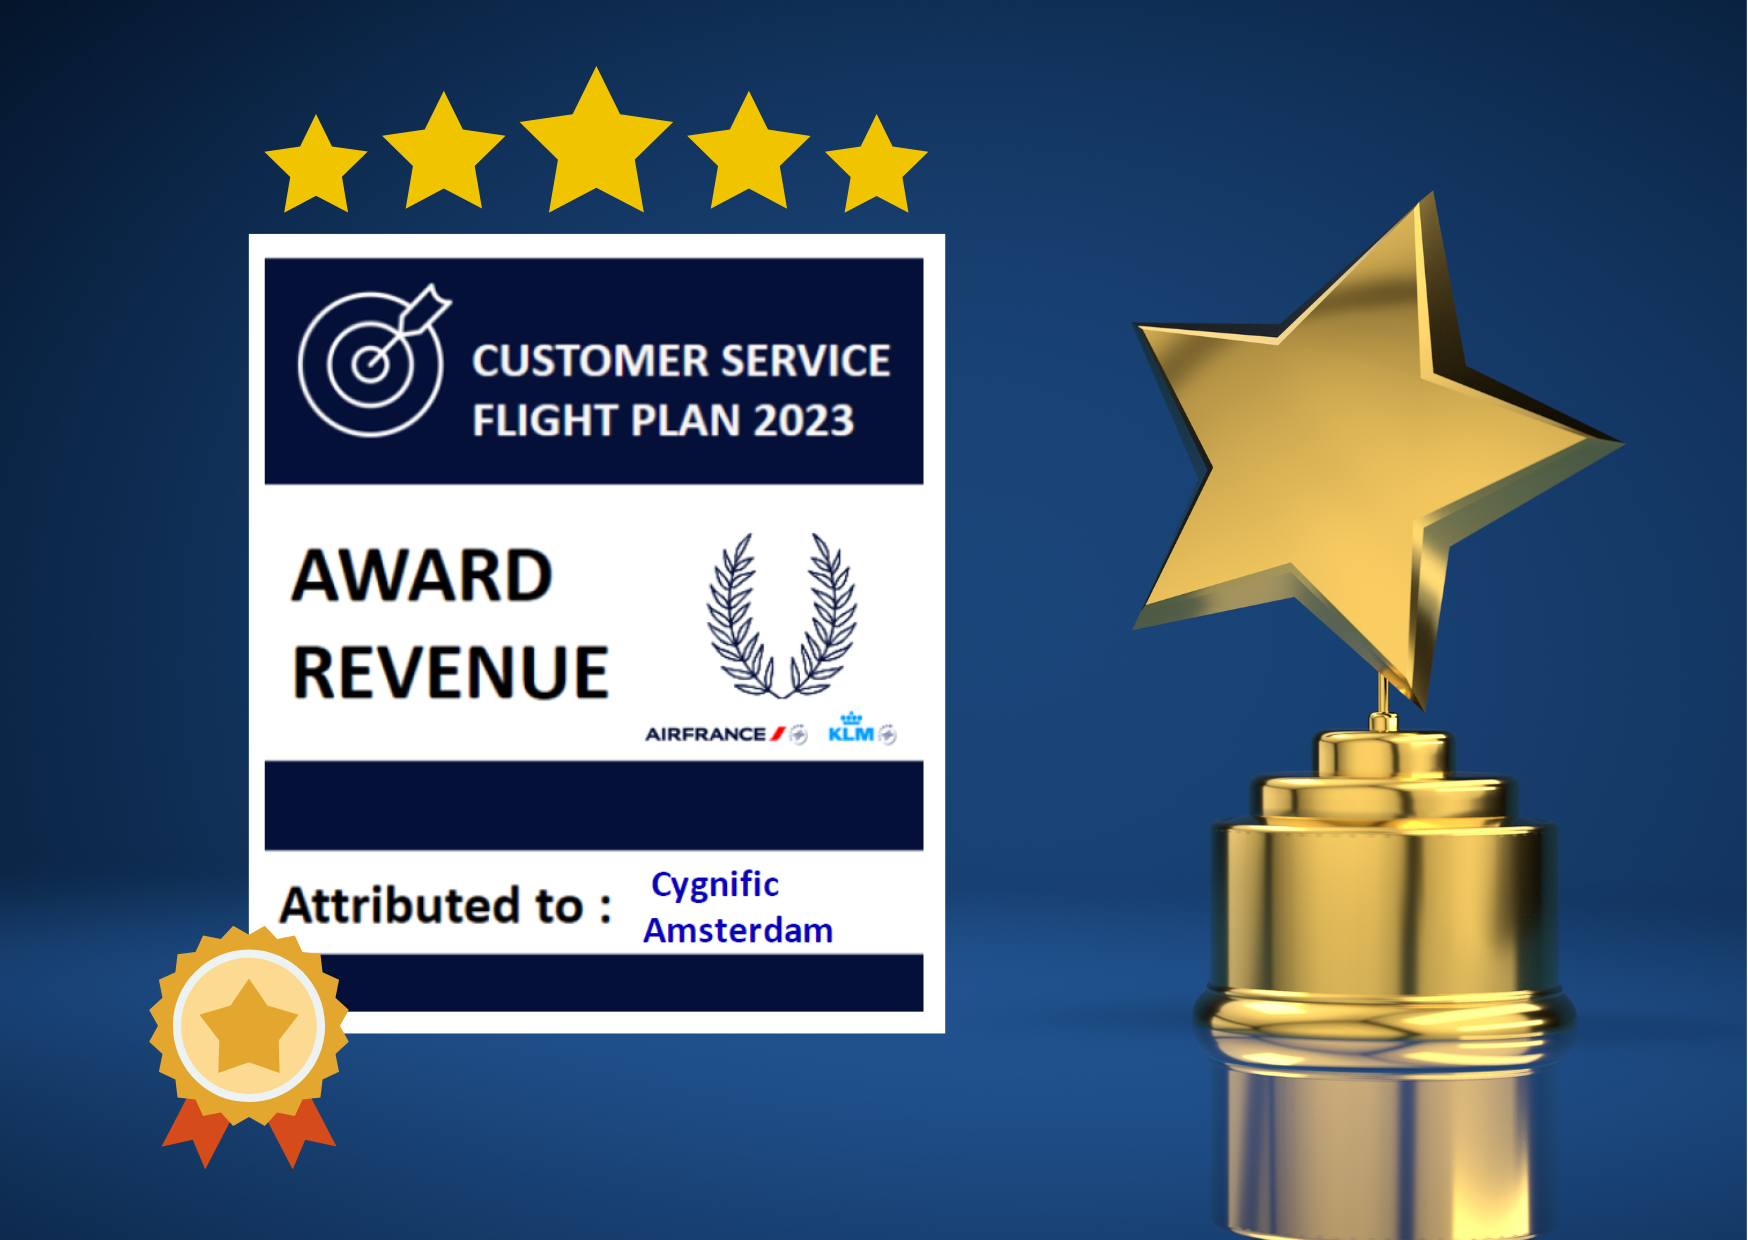 Customer Service award for highest sales in paid services